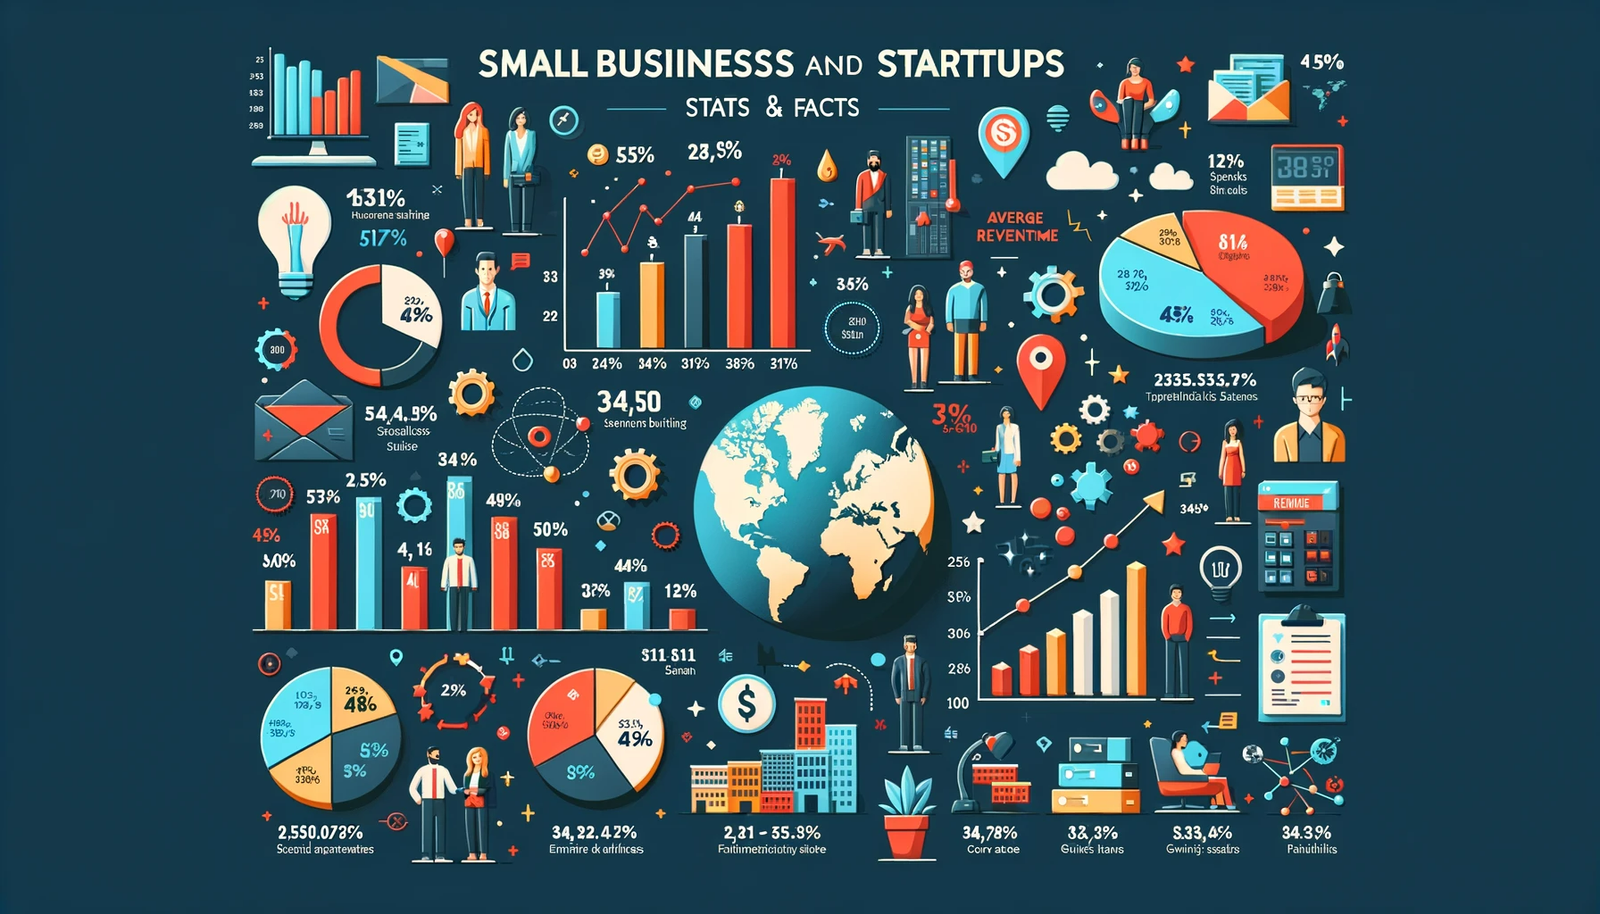 Small Businesses and Startups: Stats, Facts, and Figures